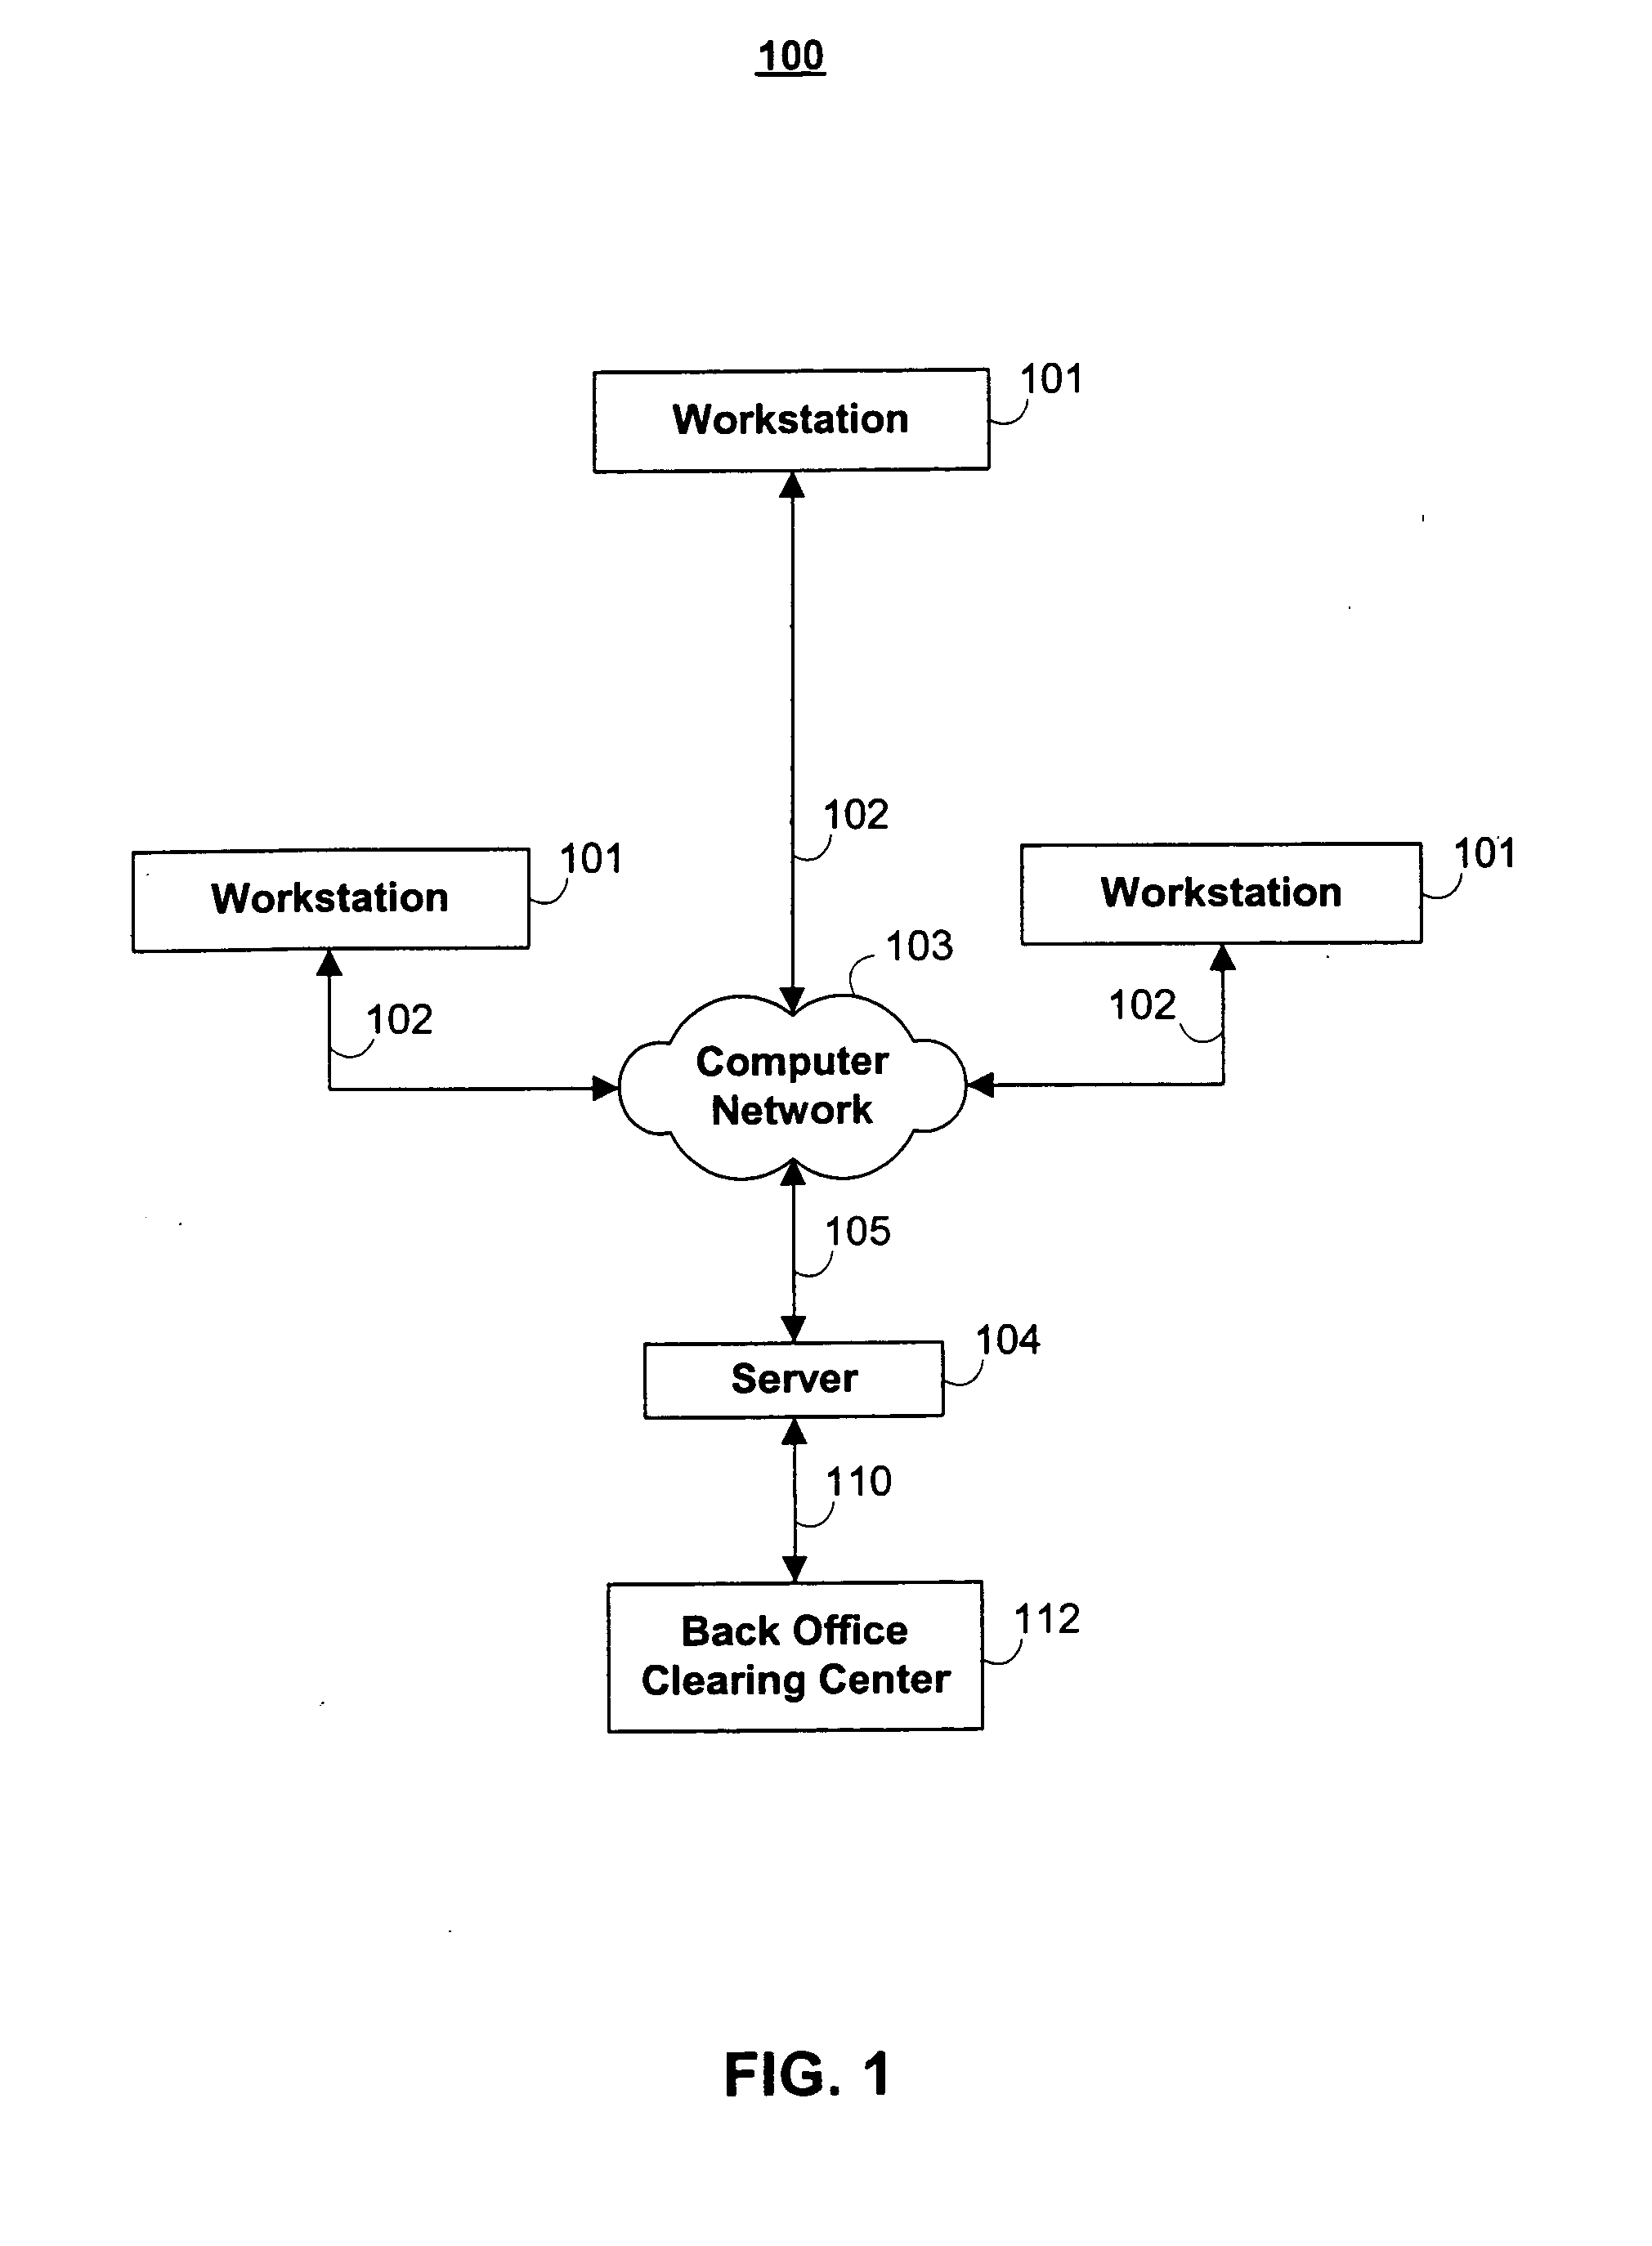 Systems and methods for improving the liquidity and distribution network for illiquid items